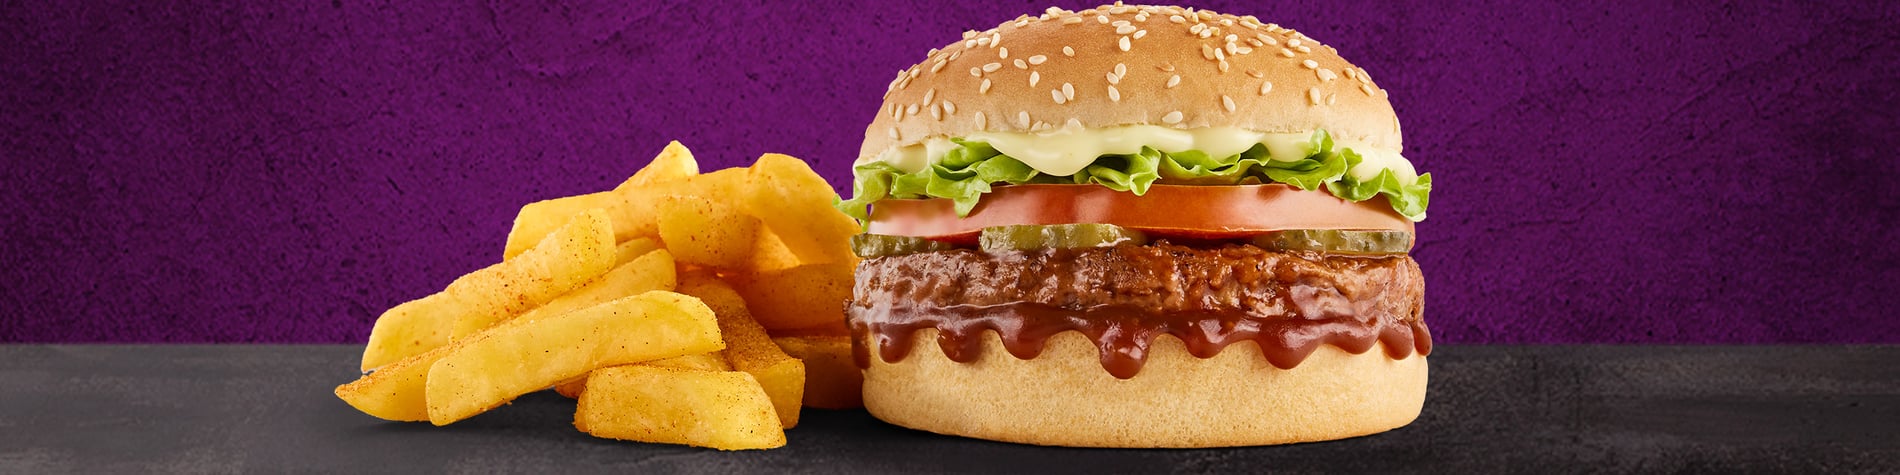 The NEW Mo’MjojoTM Burger Meal from Steers® Mossel Bay. 2 Flame-Grilled pure beef patties, pineapple, macon, tomato, lettuce, and small Famous Hand-Cut Chips, on a purple background.